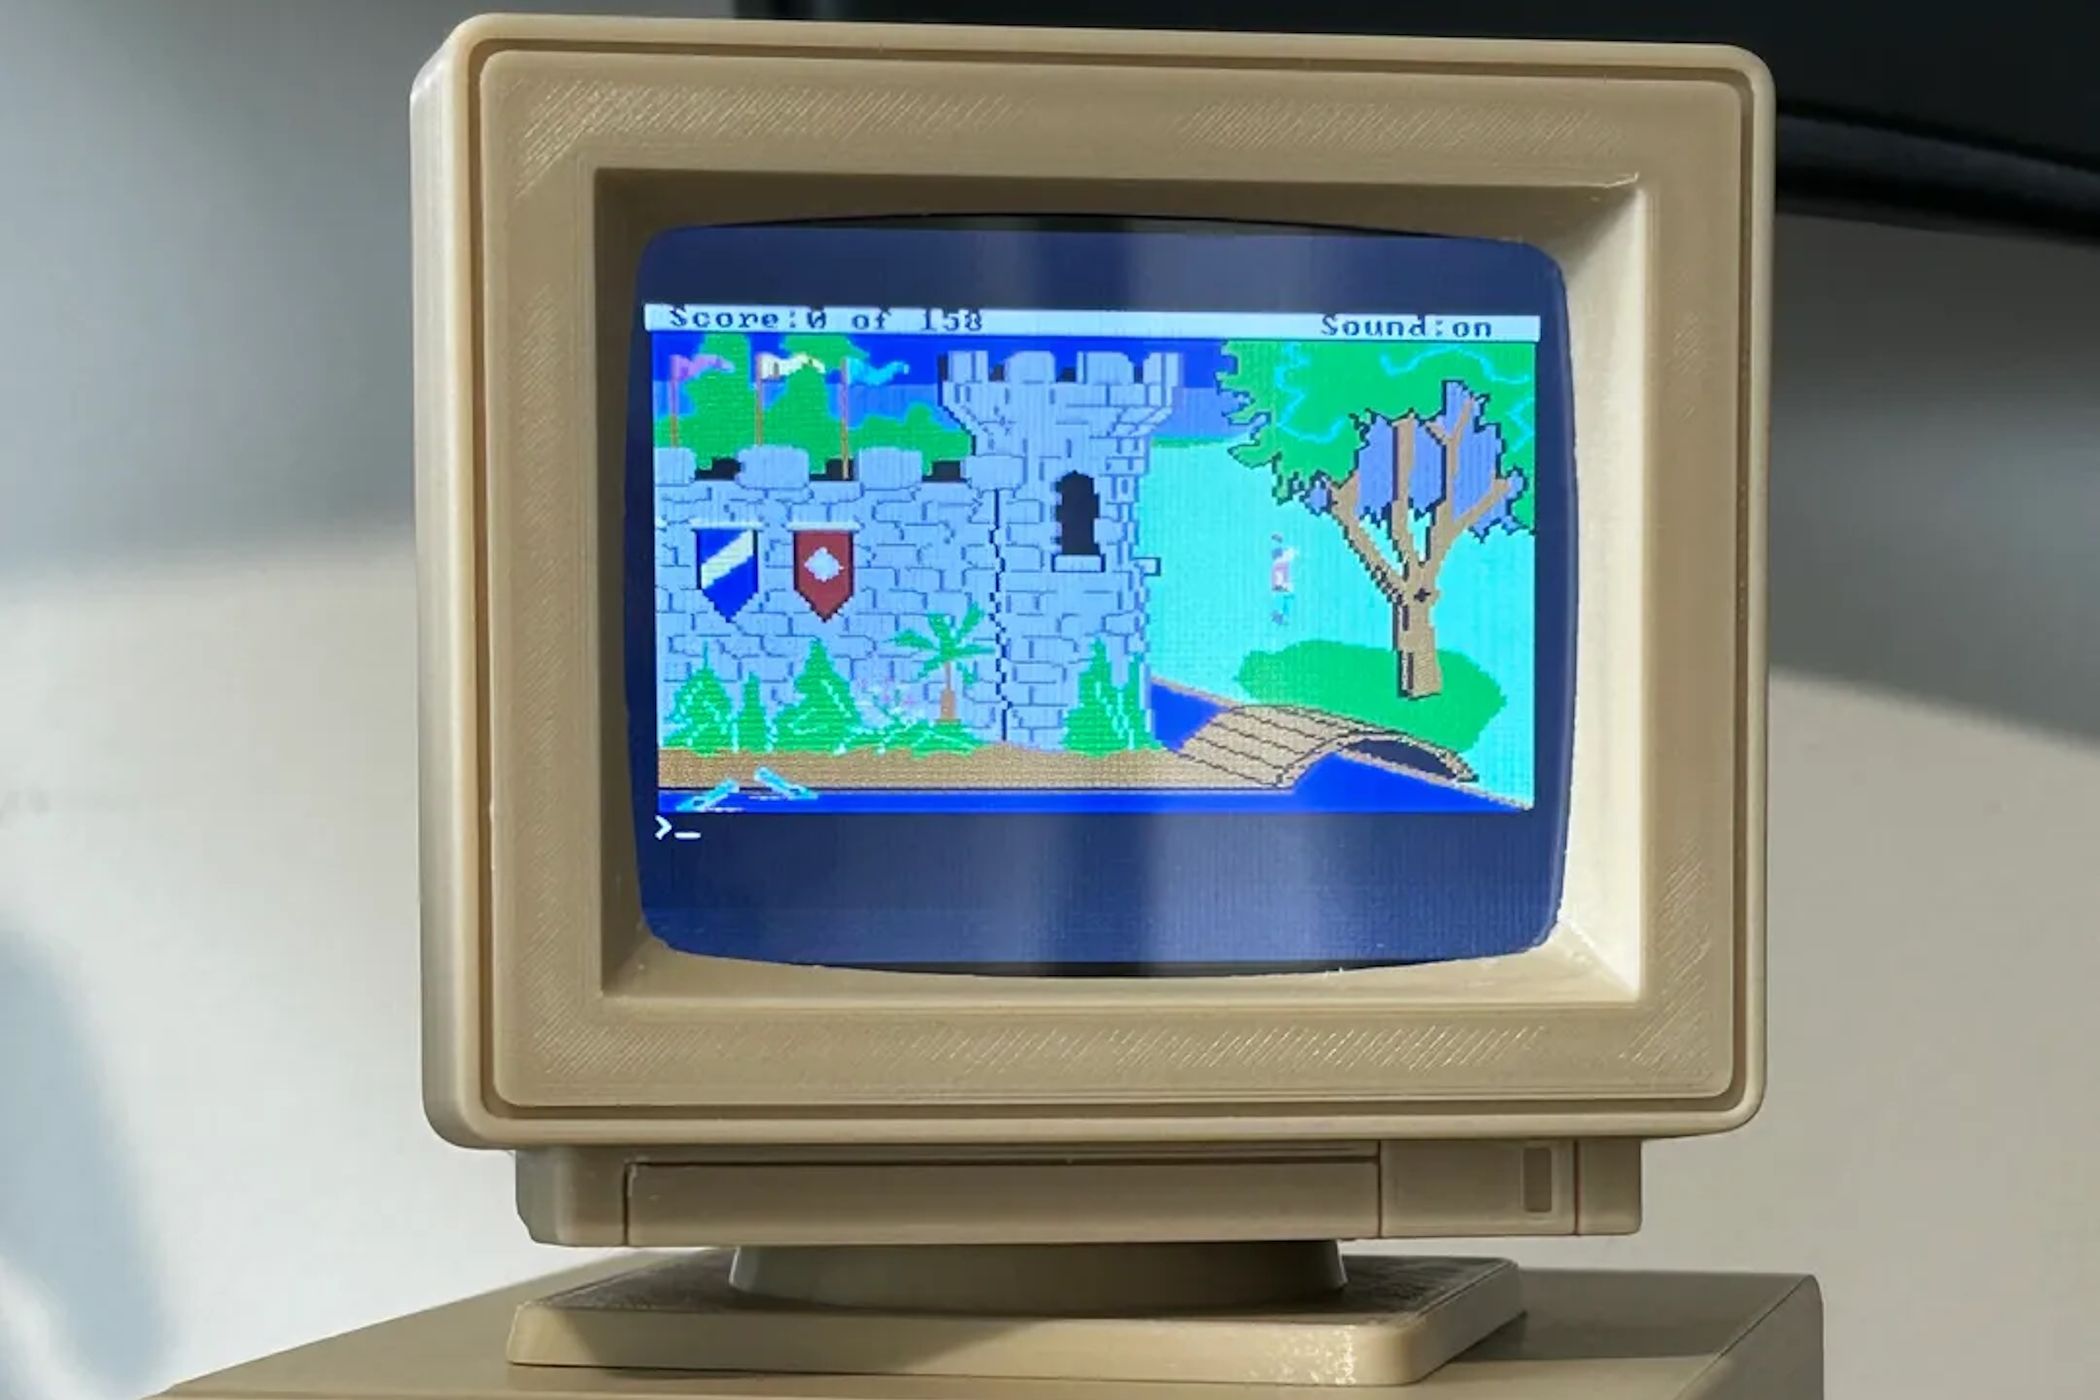 The Raspberry Pi Retro PC playing King's Quest